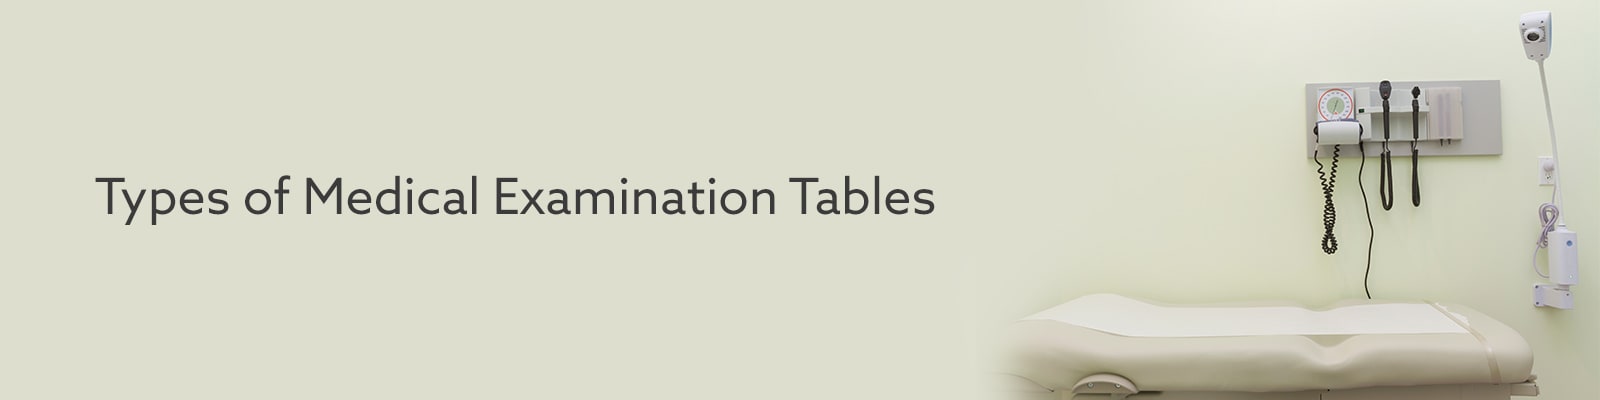 Types of Medical Examination Tables - Henry Schein